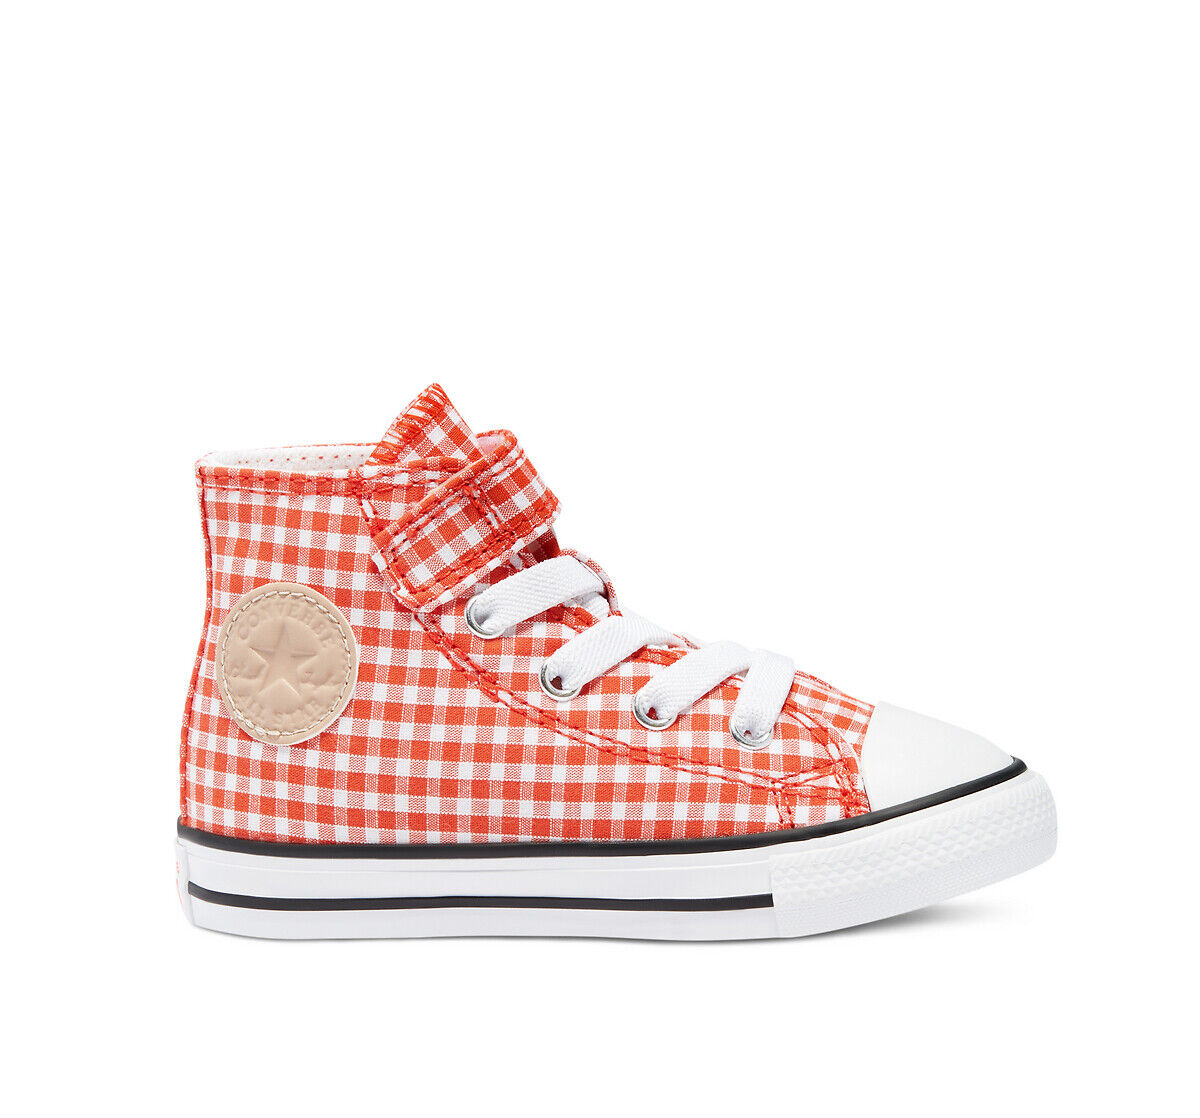 CONVERSE Sneakers Chuck Taylor All Star 1V WEISS